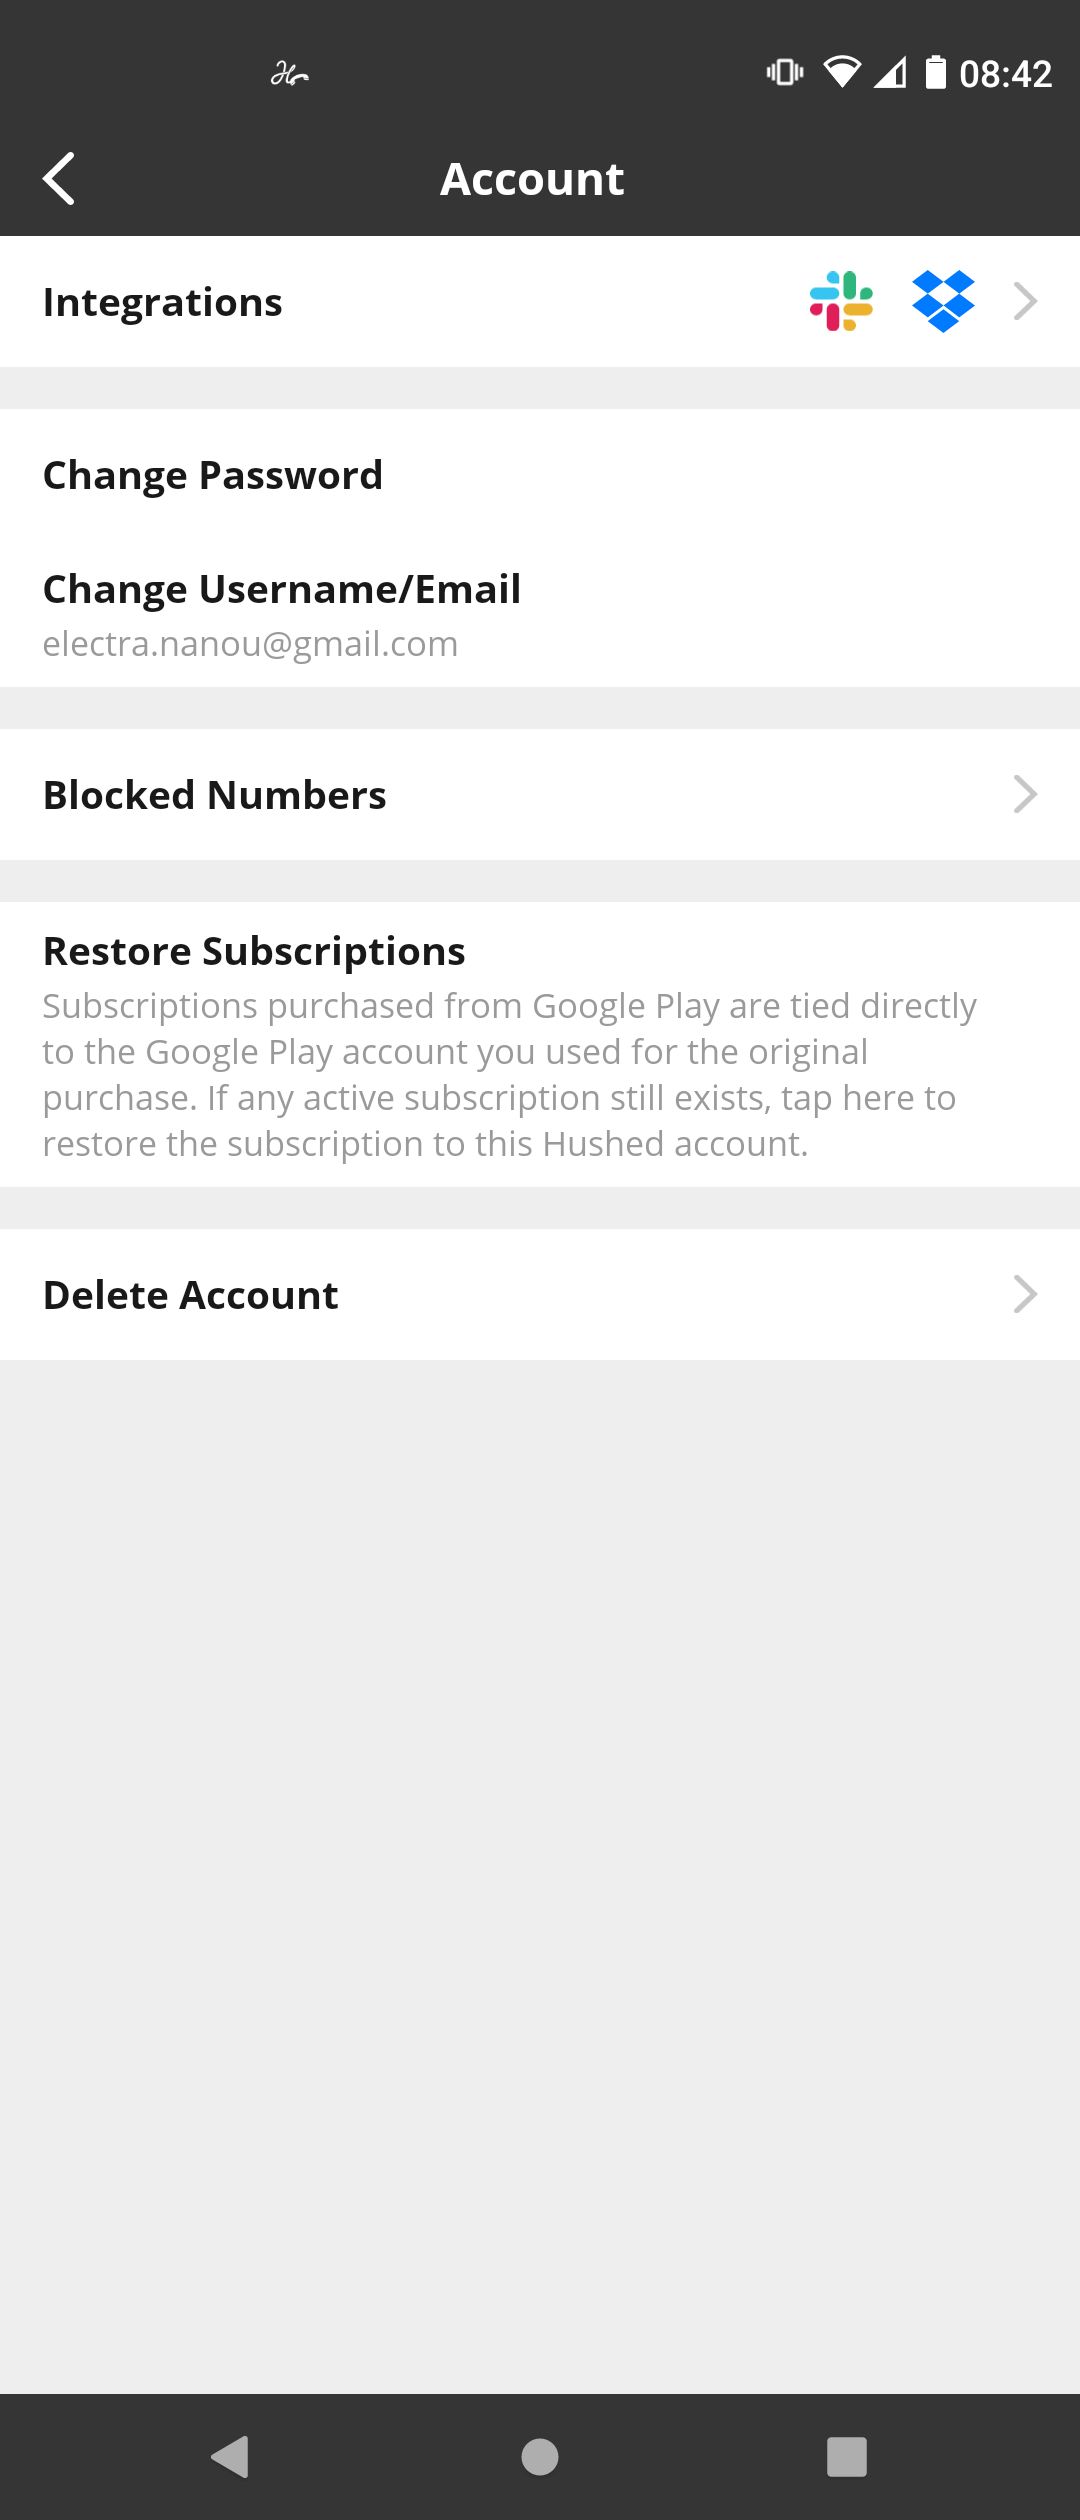 Account Settings and Features on Hushed App